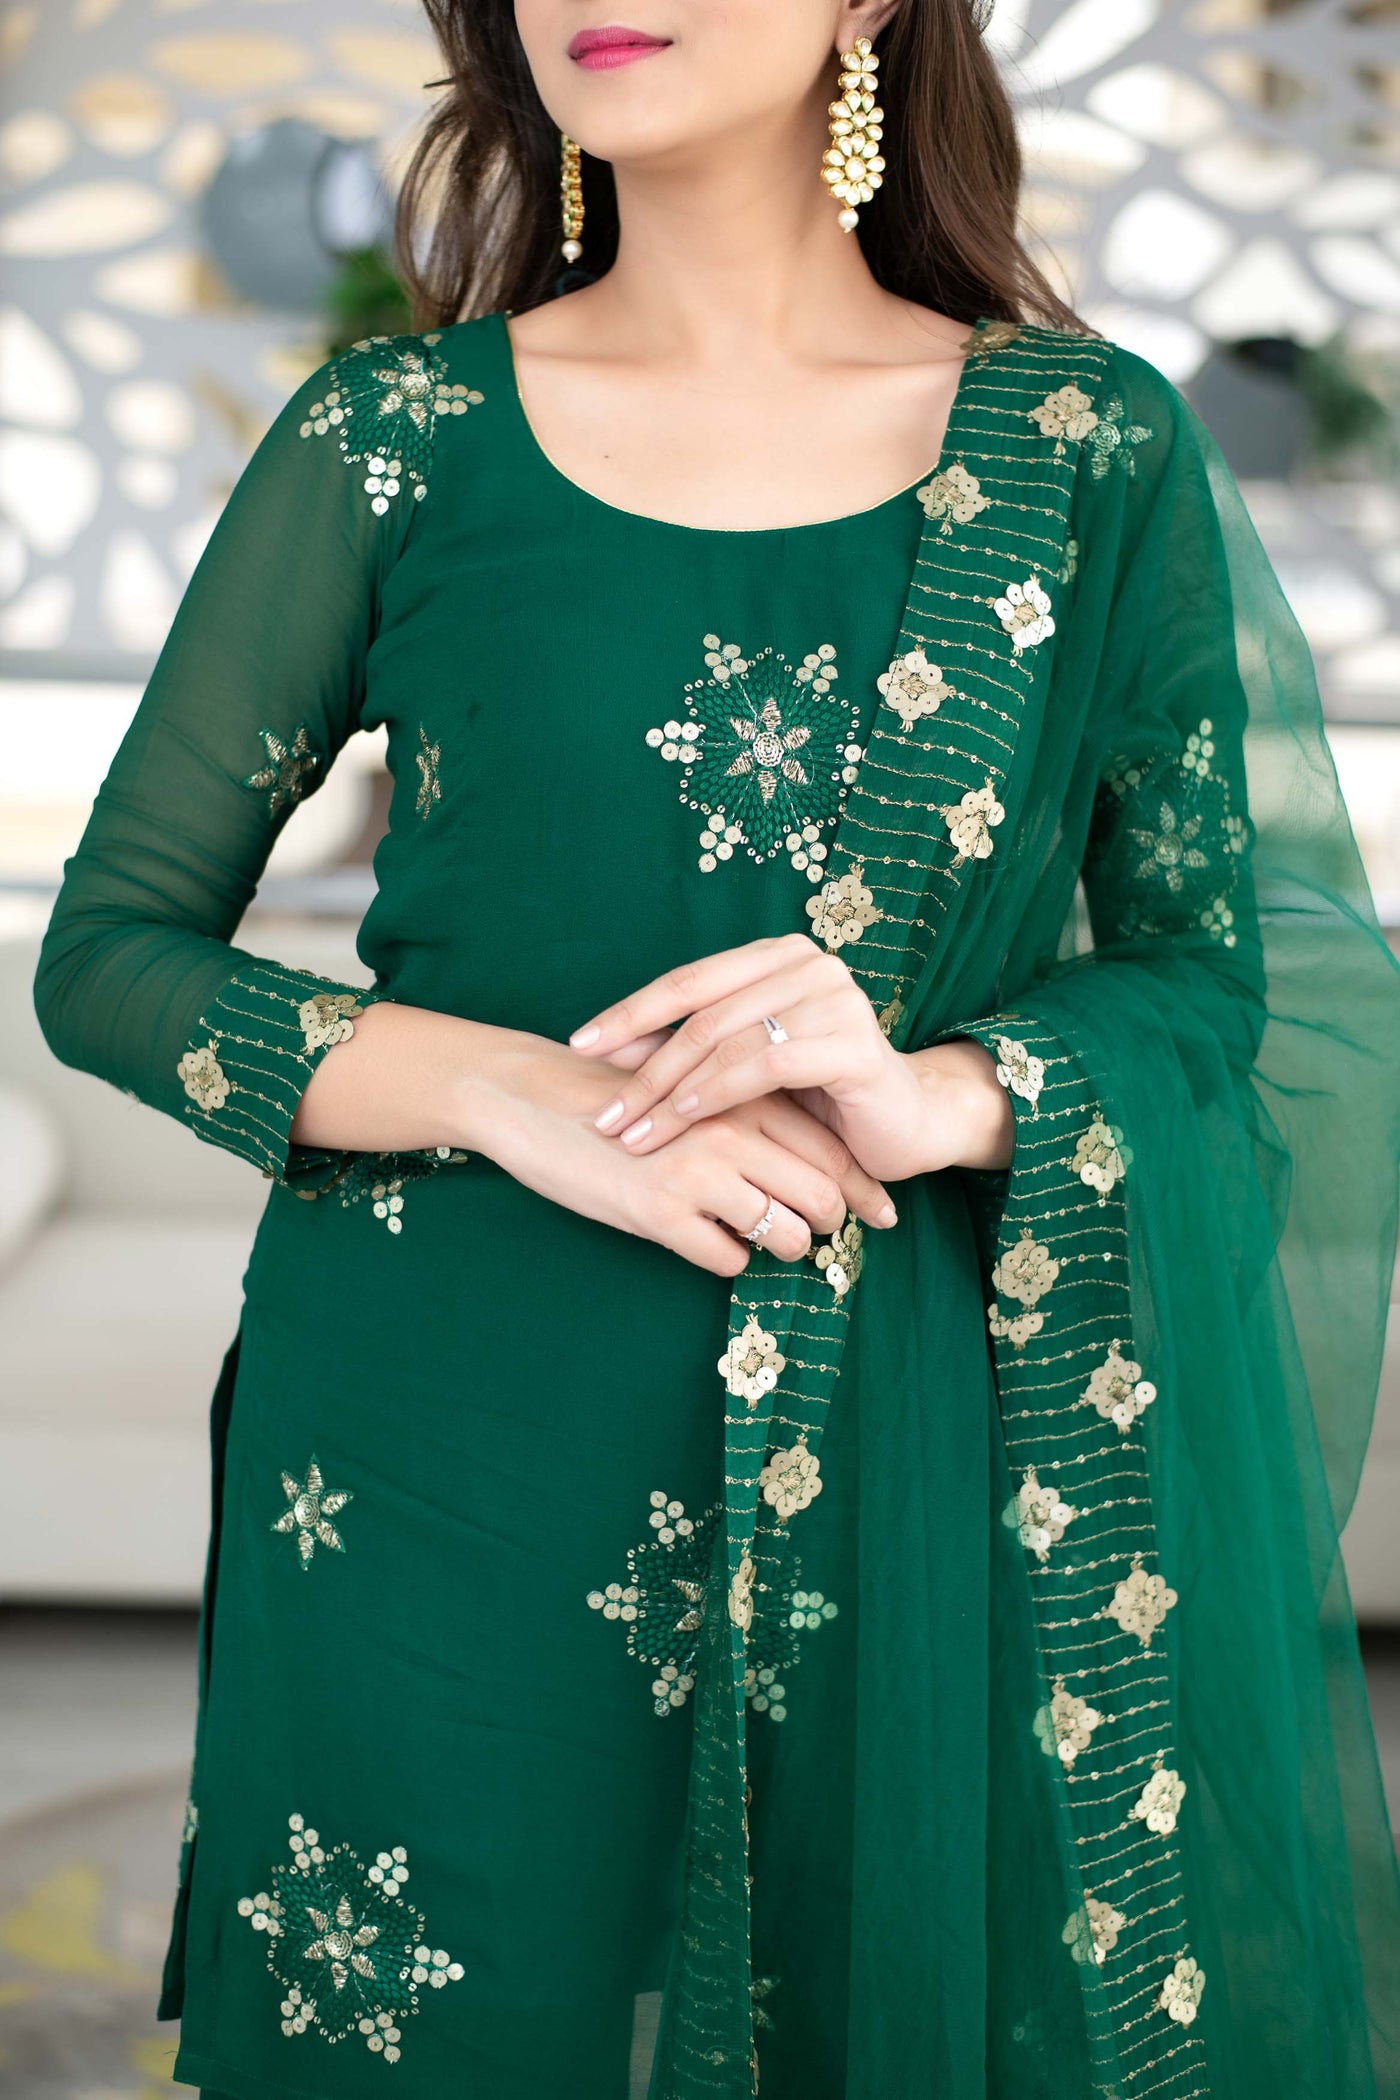 Green Georgette Sharara Suit Set With Net Dupatta | Relove